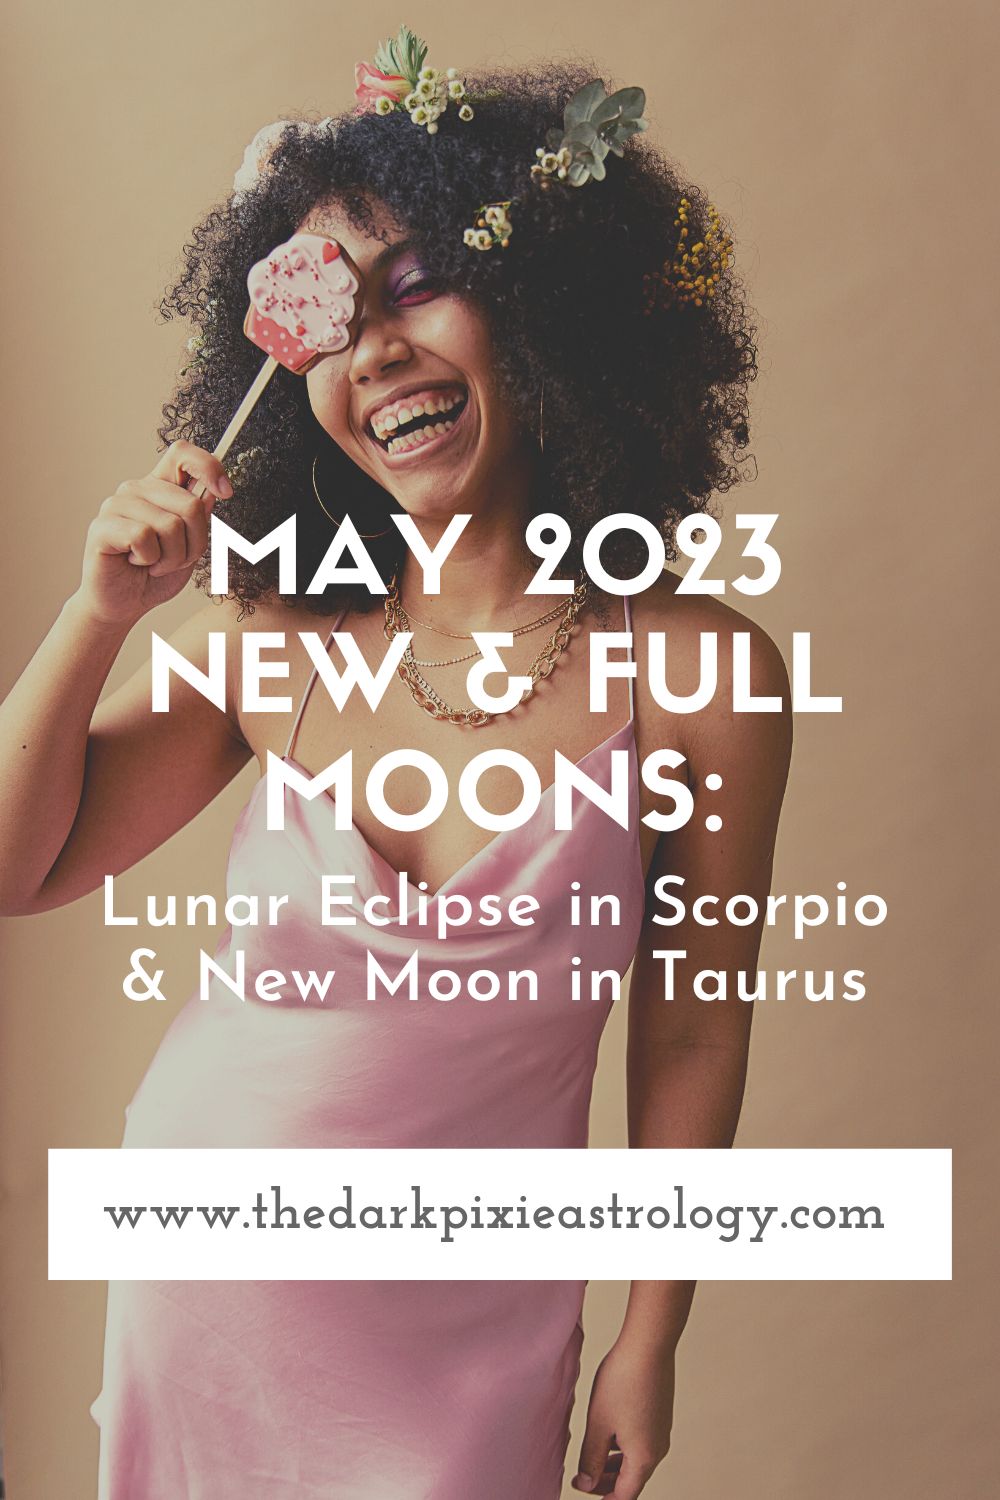 May 2023 New & Full Moons: Lunar Eclipse in Scorpio & New Moon in Taurus - The Dark Pixie Astrology